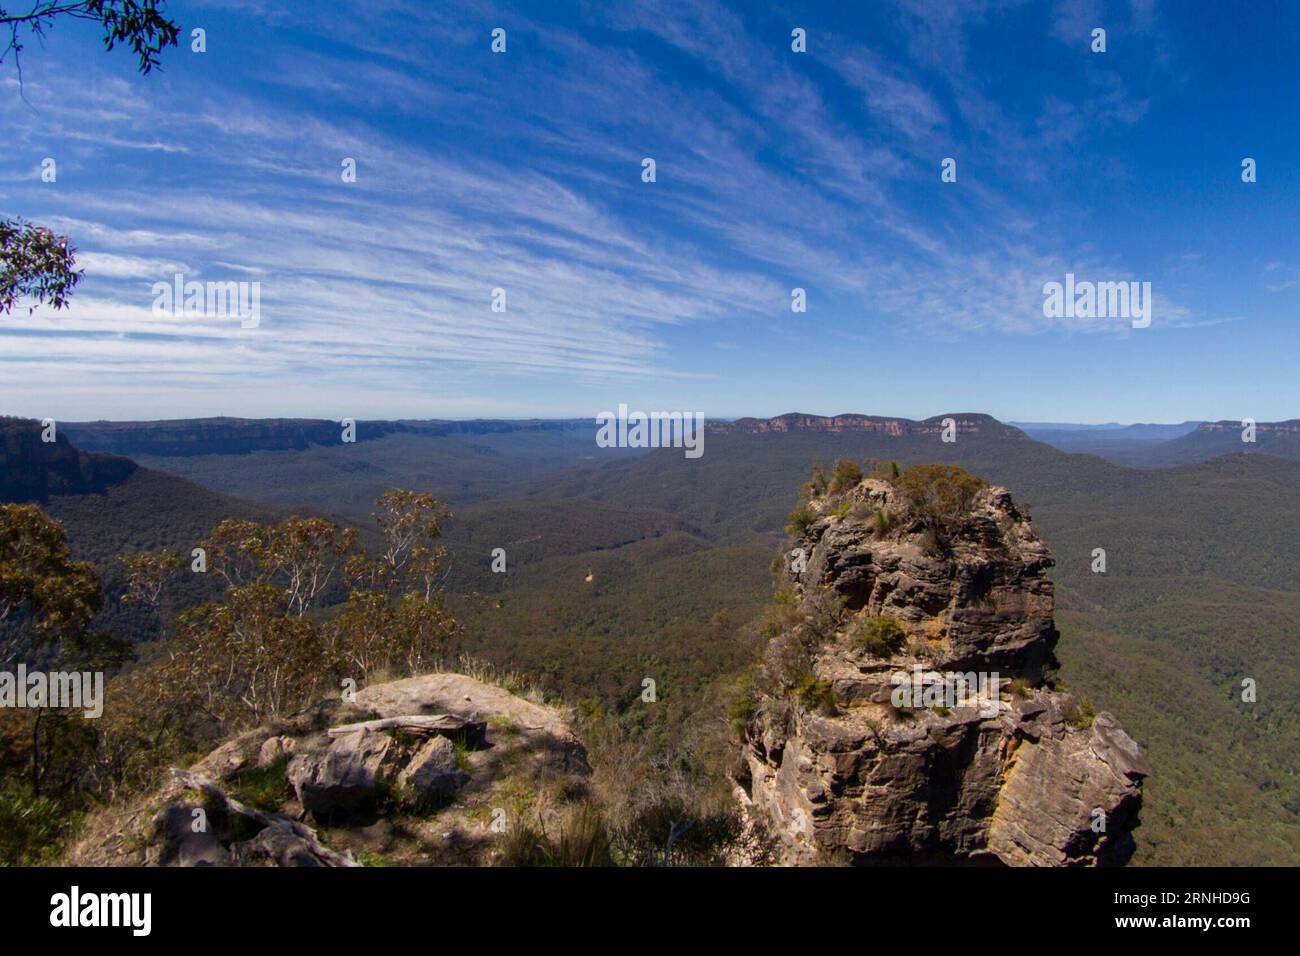 (161111) -- SYDNEY, Nov. 11, 2016 -- Photo taken on Oct. 25, 2016 shows the Blue Mountains National Park in New South Wales state, Australia. Four percent of Australia s continent is protected for conservation, encompassed within just over 500 national parks, or some 28 million hectares of land. Most national parks are managed by Australia s state and territory governments -- states are responsible for land management under Australia s constitution -- though the Commonwealth Government looks after six national parks, the National Botanic Gardens and 58 individual marine reserves. )(zhf) AUSTRA Stock Photo